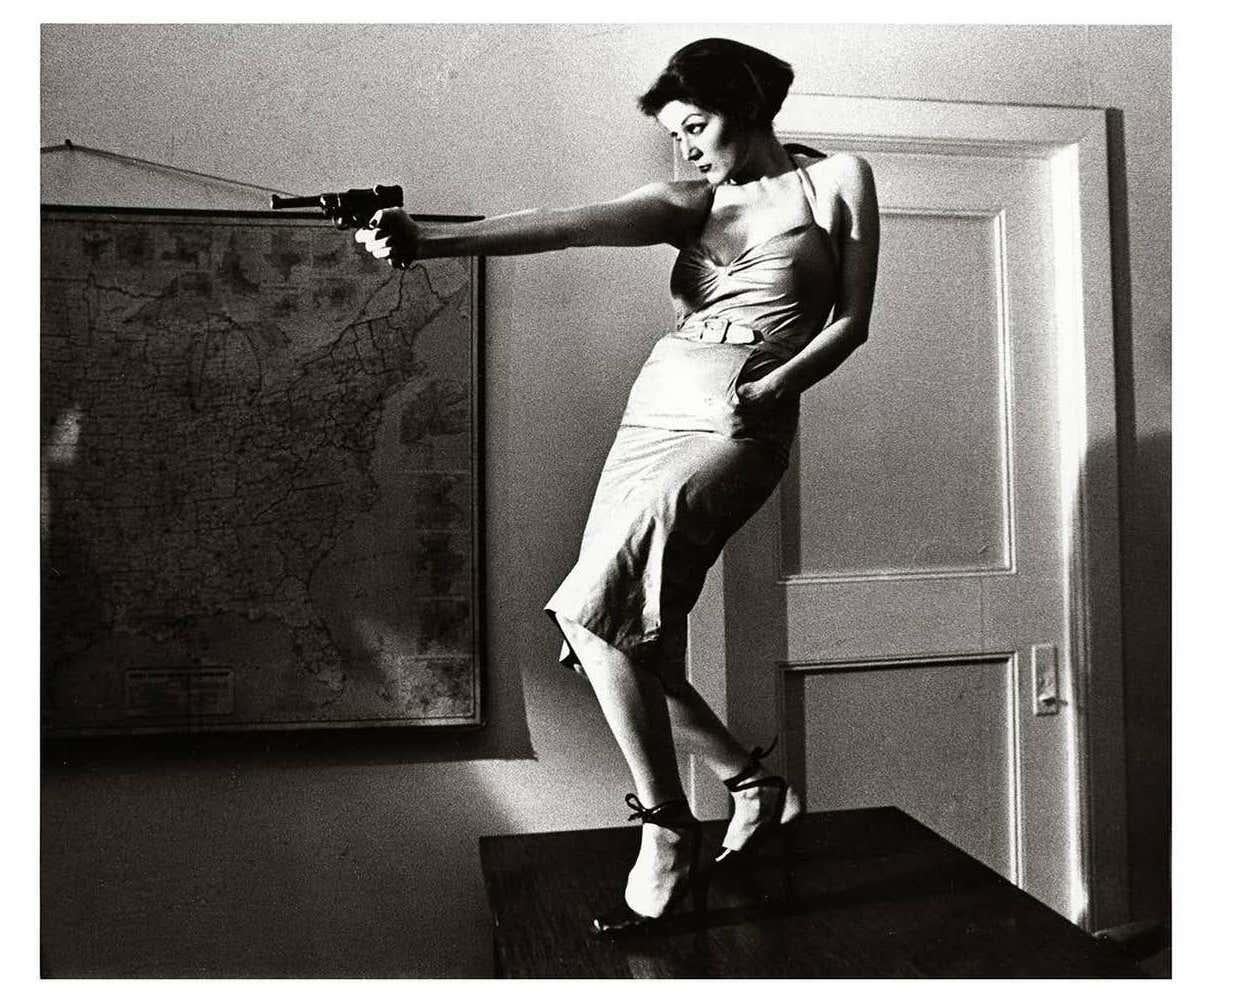 Girl With A Gun, Patti Astor East Village photo 1977 (The Foreigner)  - Photograph by Fernando Natalici